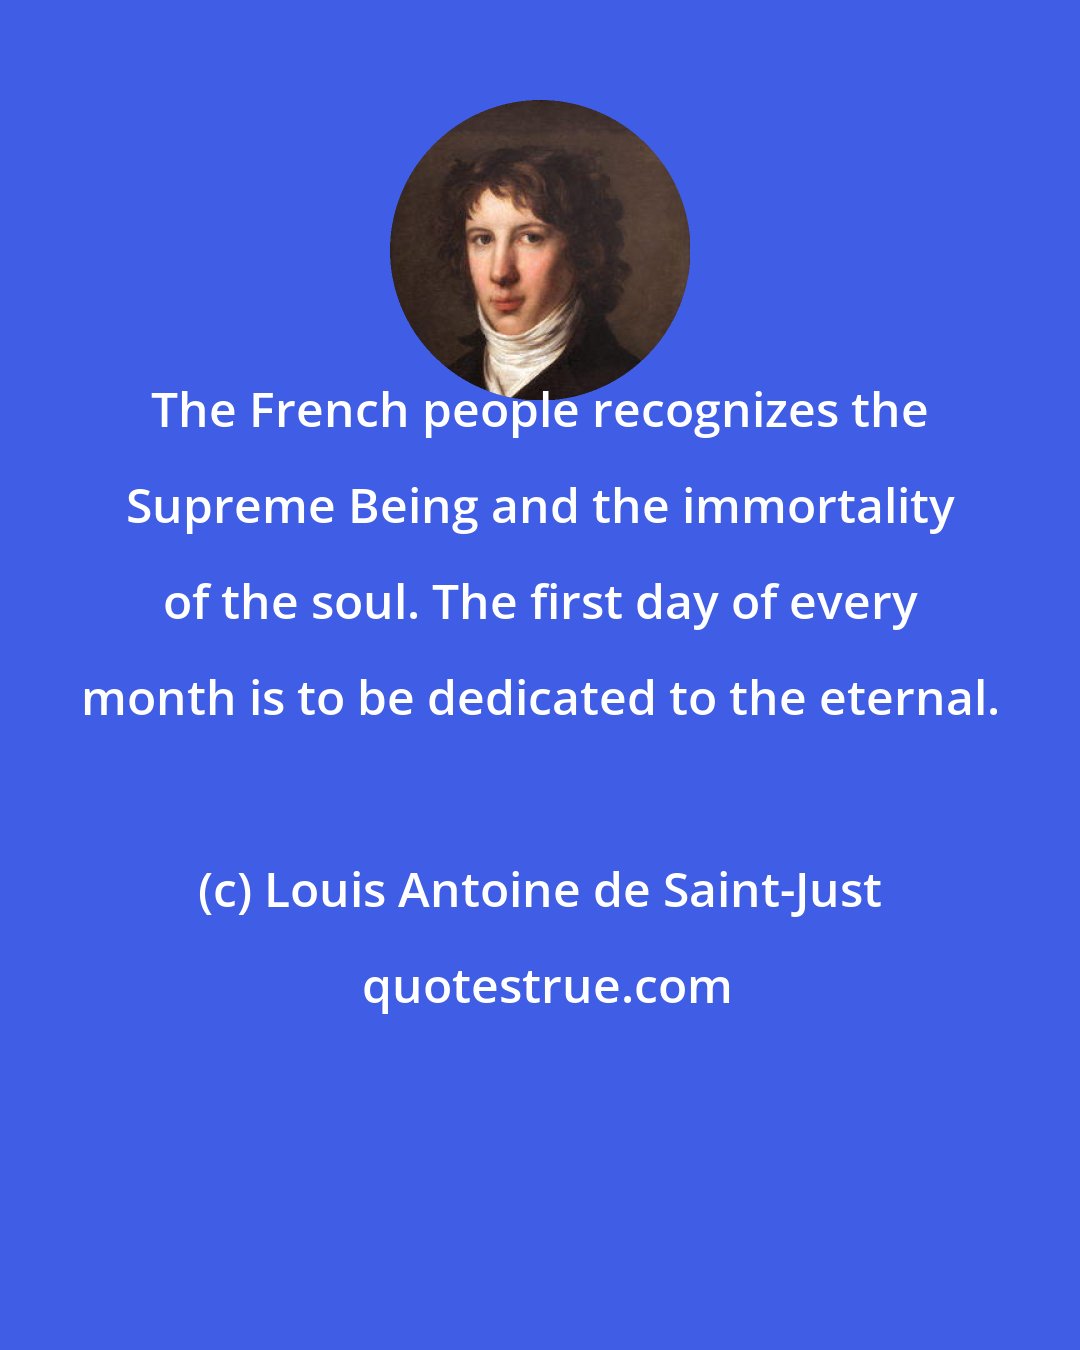 Louis Antoine de Saint-Just: The French people recognizes the Supreme Being and the immortality of the soul. The first day of every month is to be dedicated to the eternal.